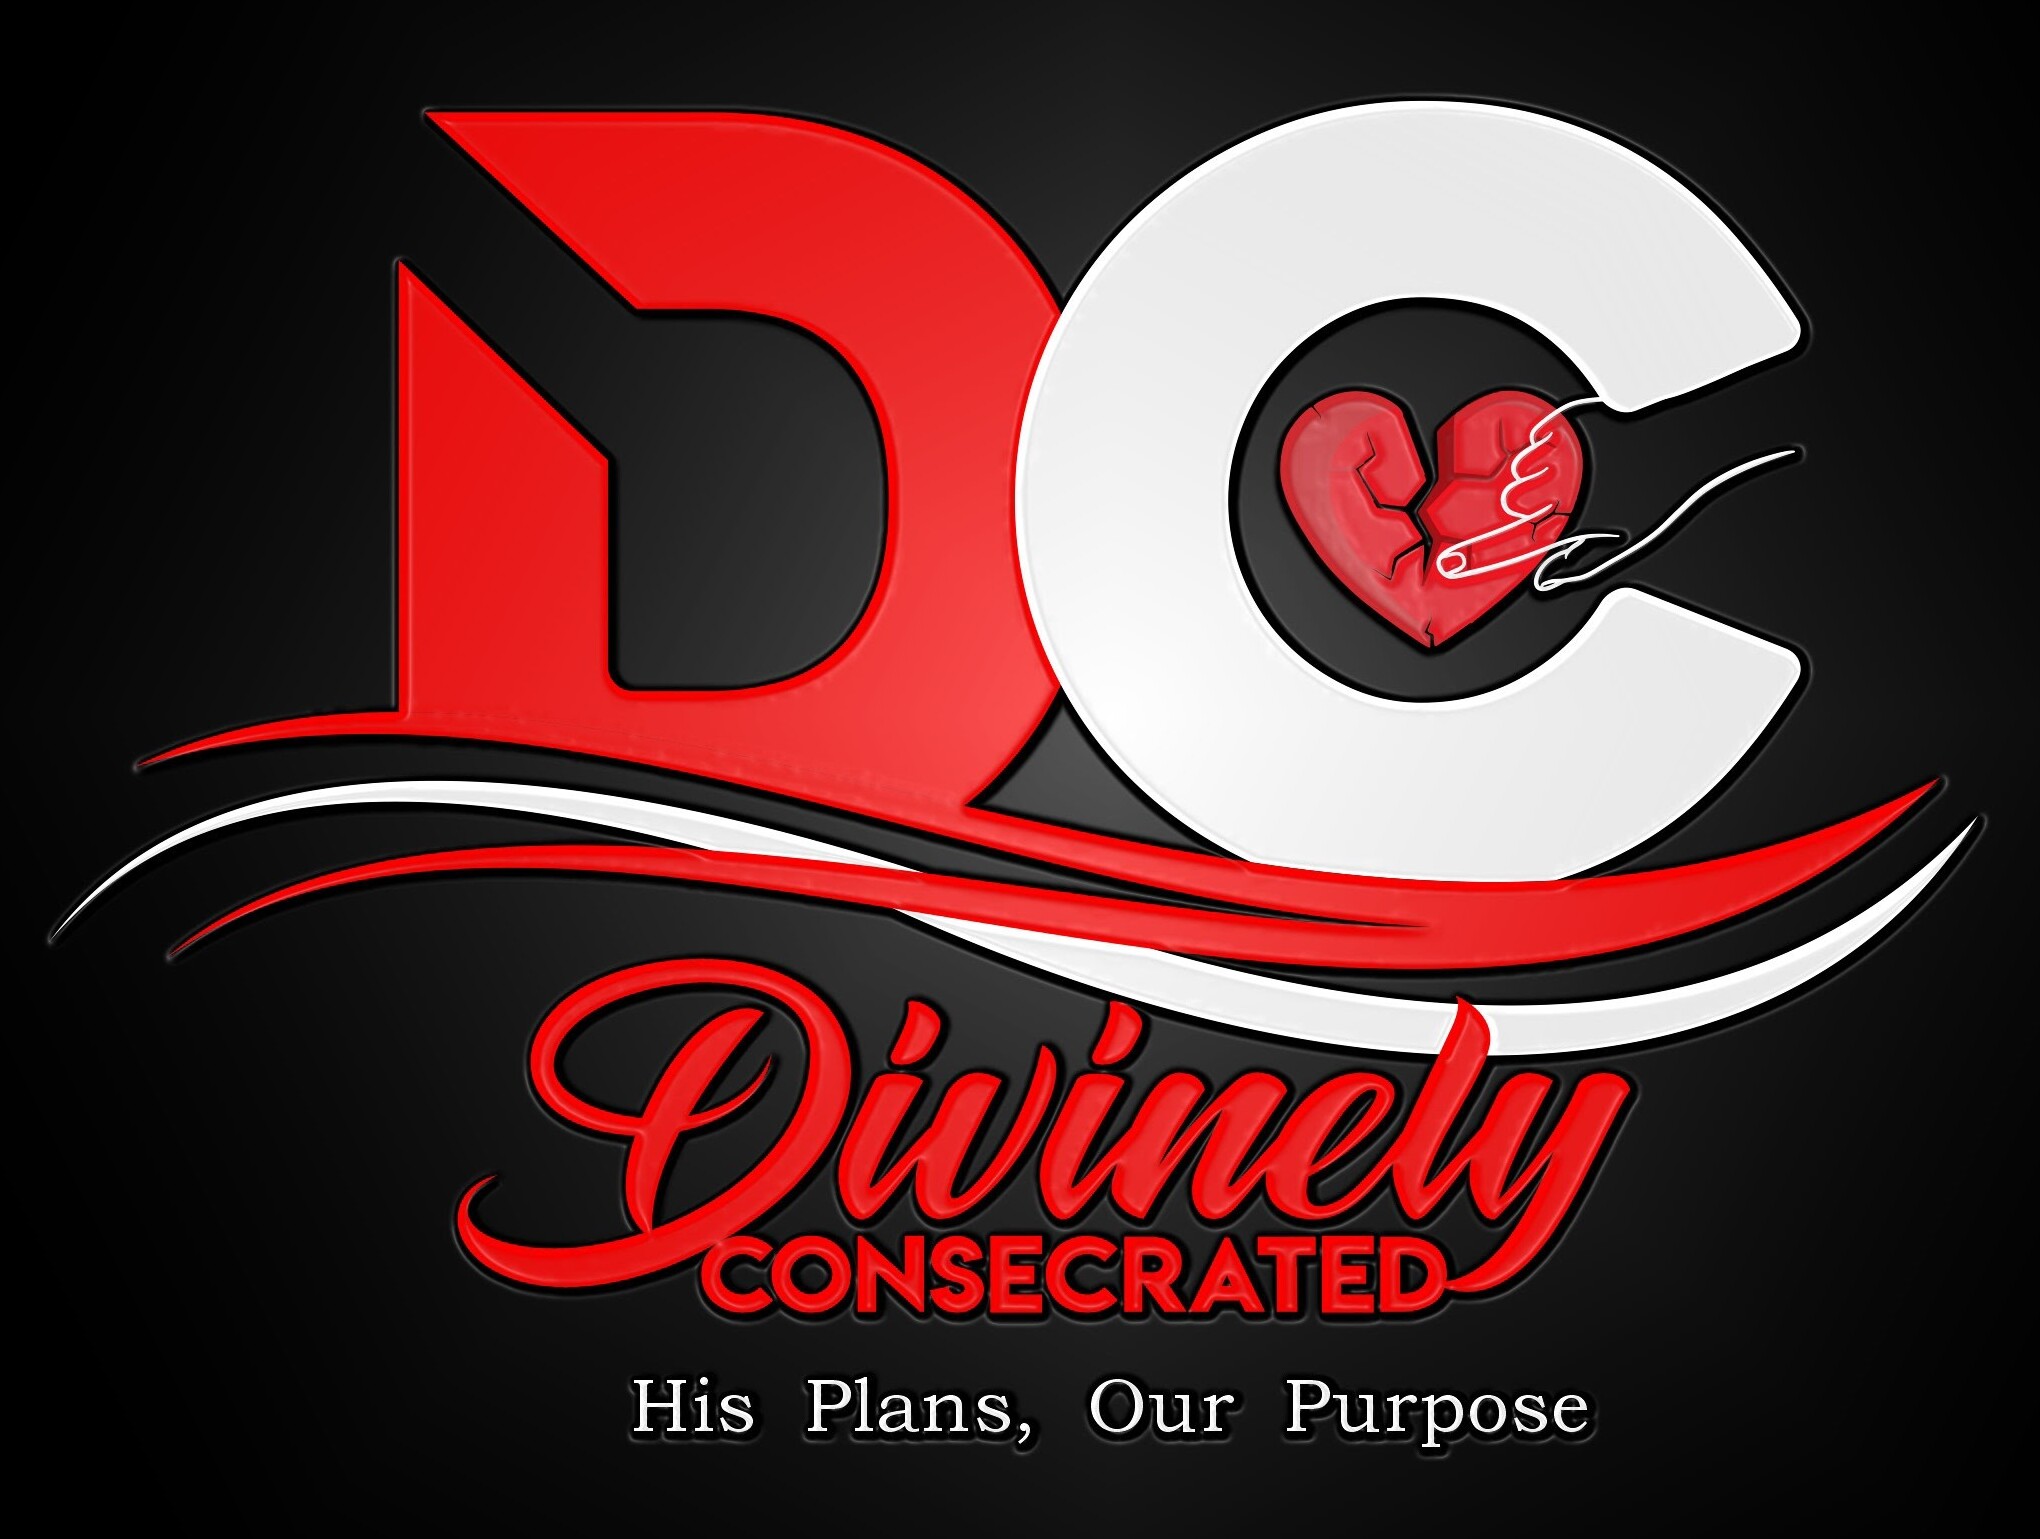 Divinely Consecrated